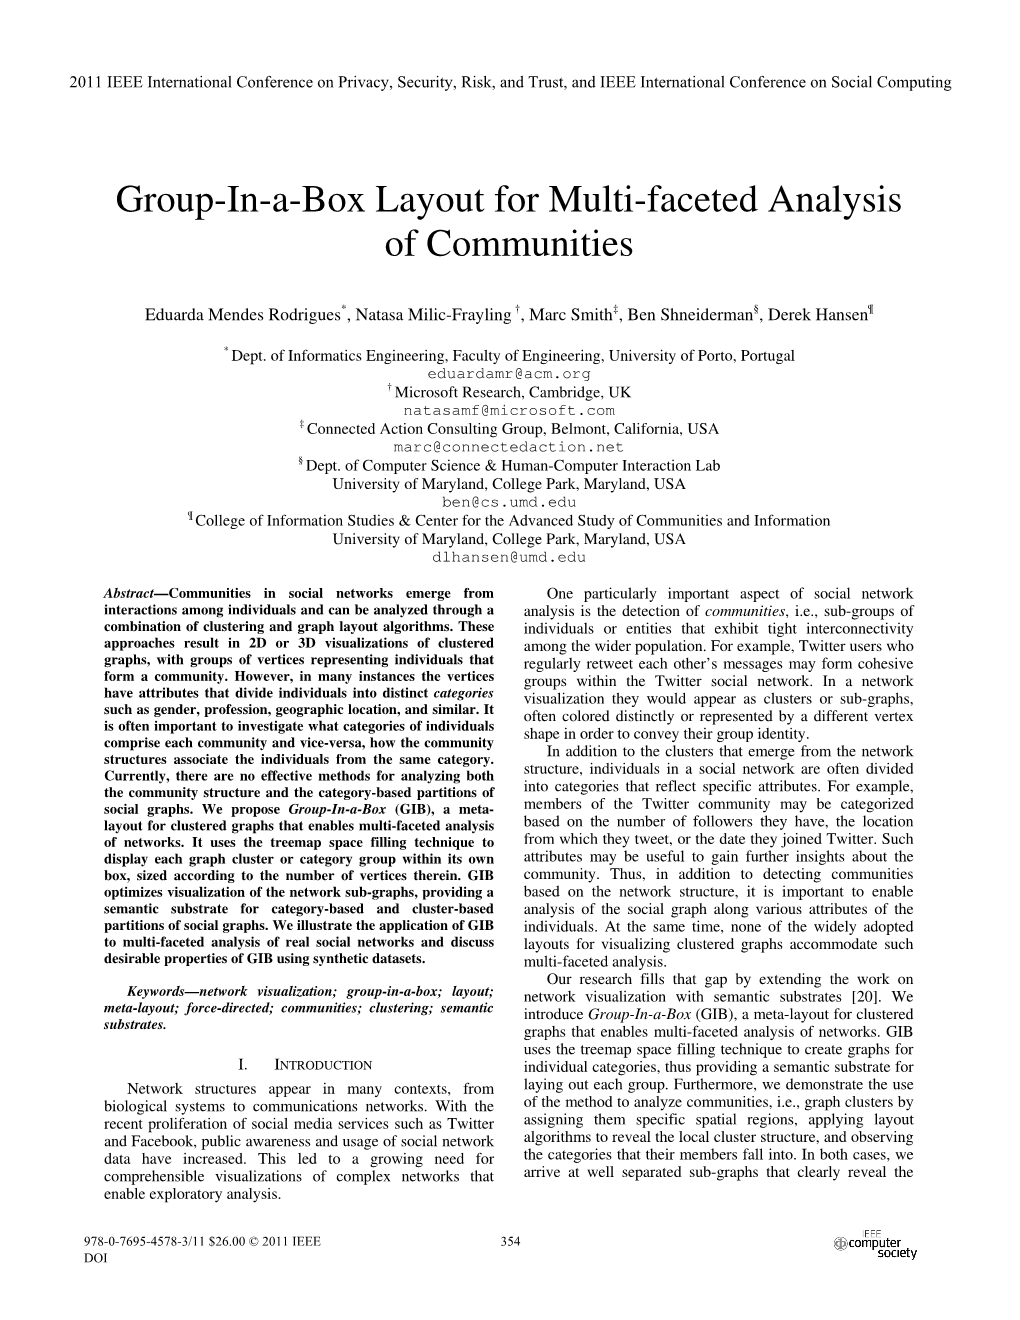 Group-In-A-Box Layout for Multi-Faceted Analysis of Communities